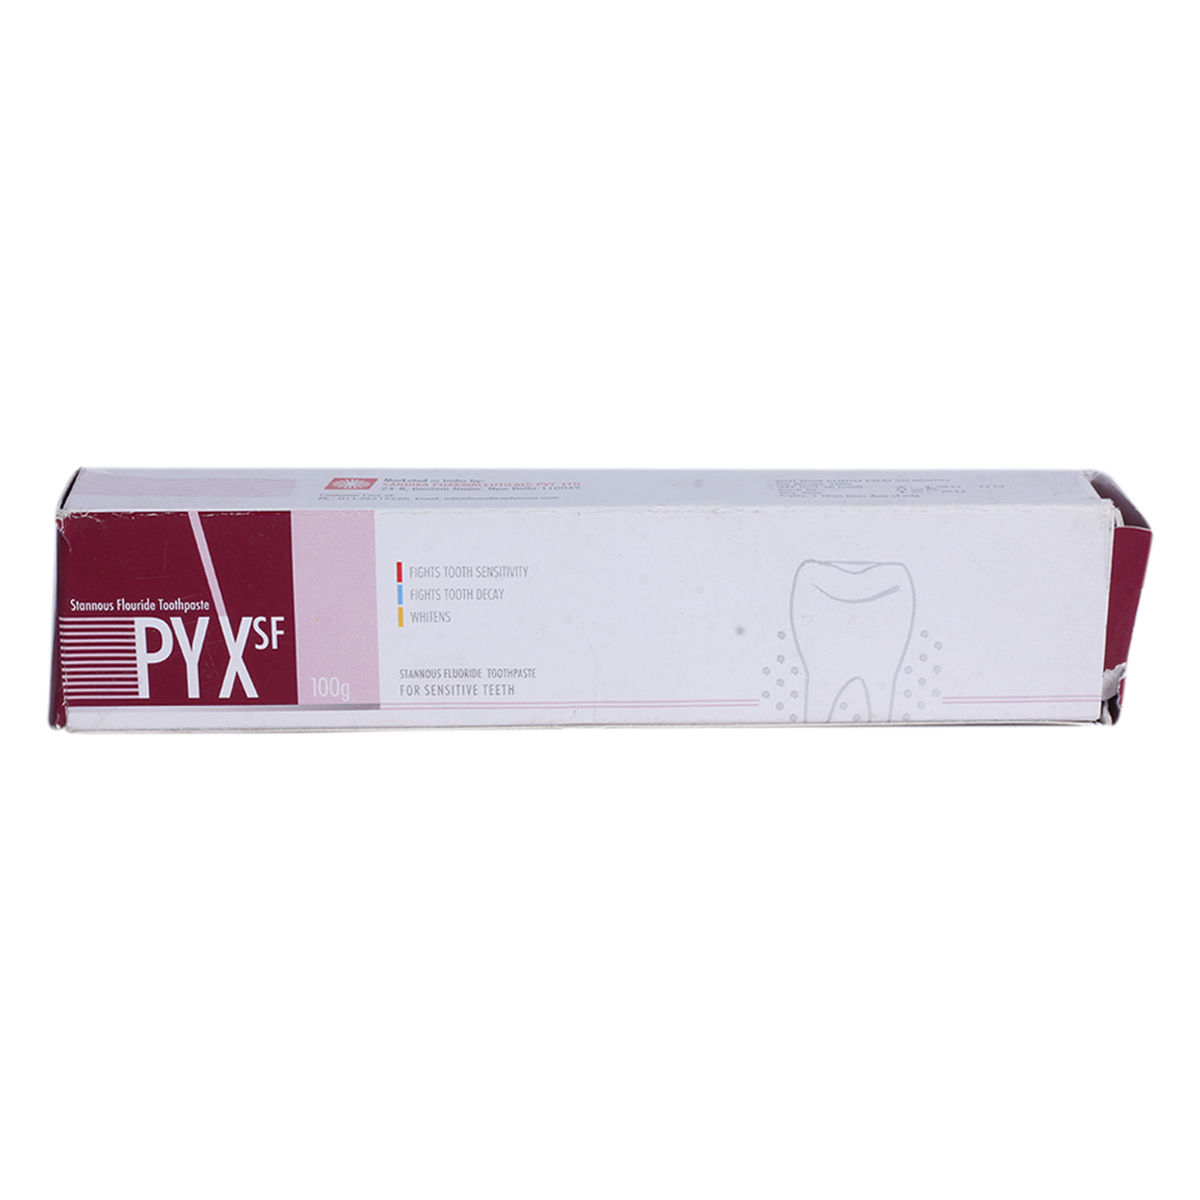 Buy Pyx Sf Toothpaste, 100 gm Online